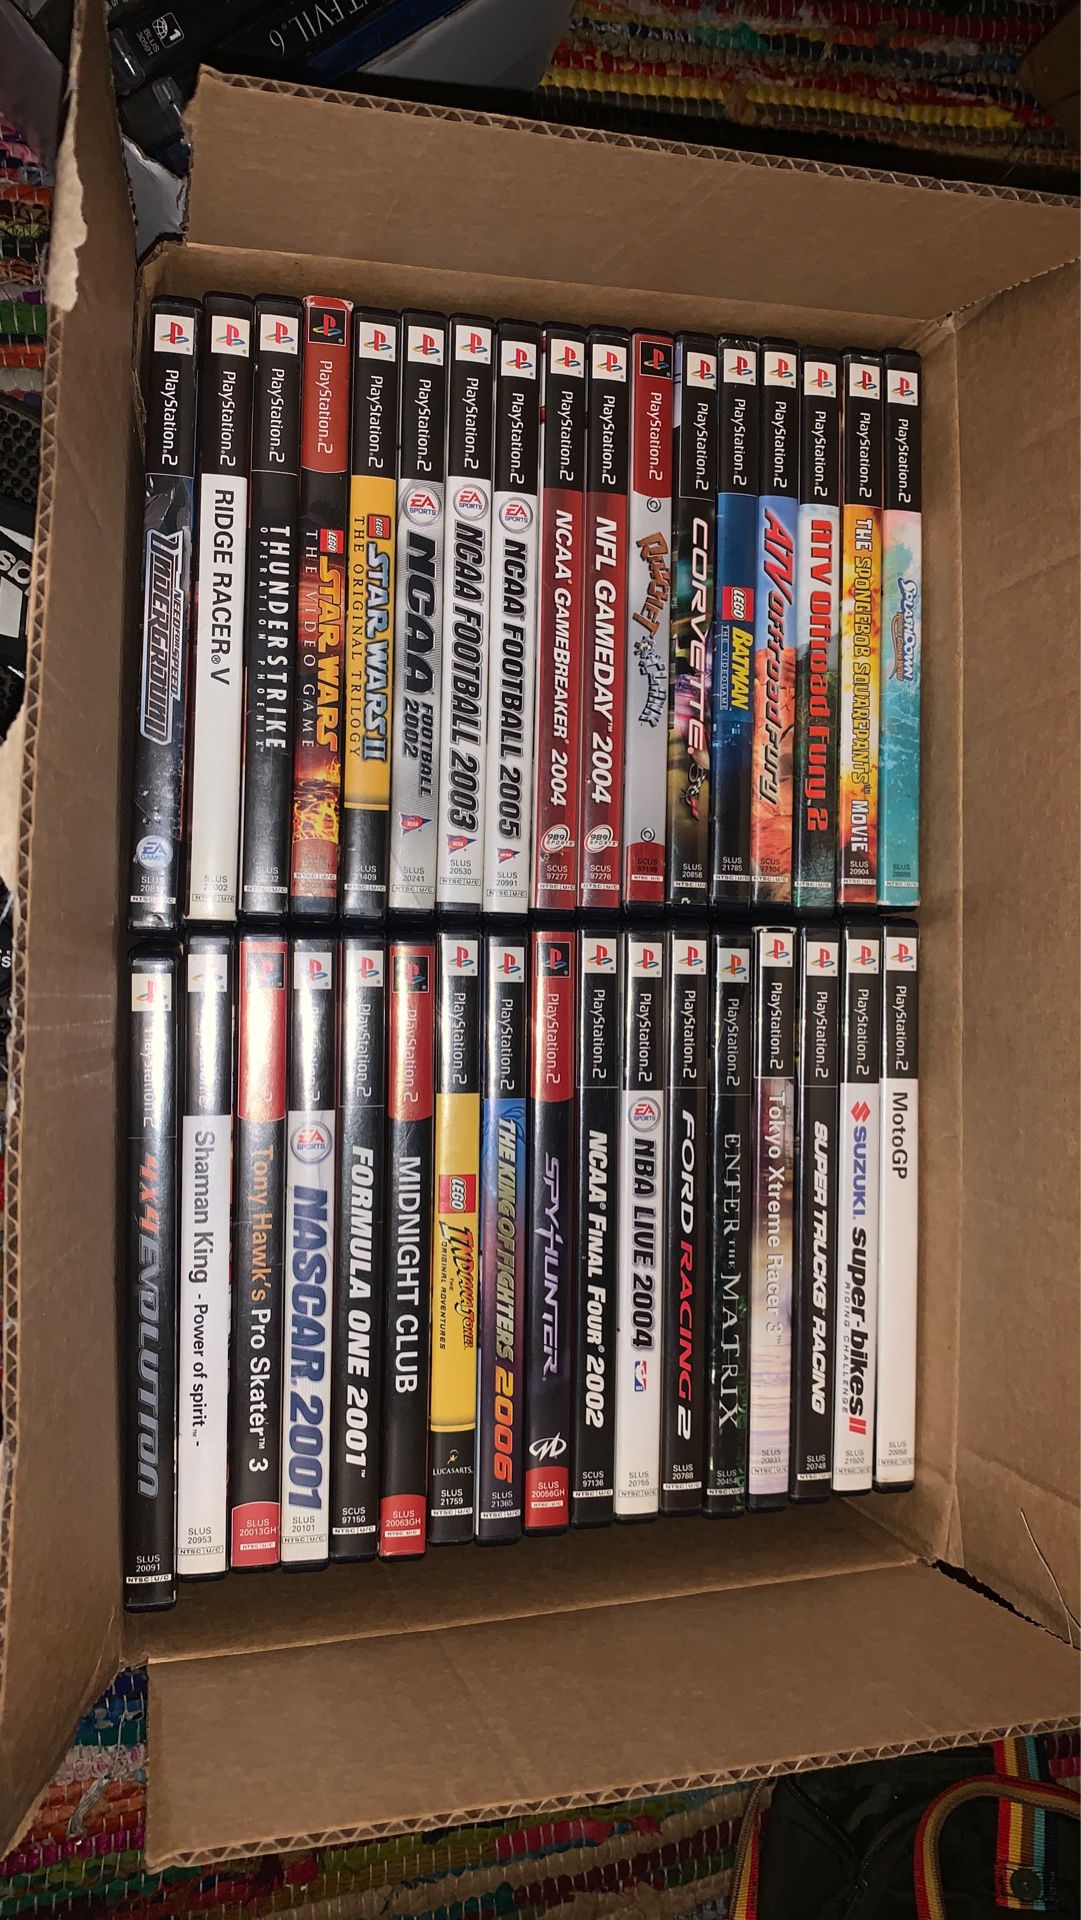 ps2, ps3 and wii/wii u games